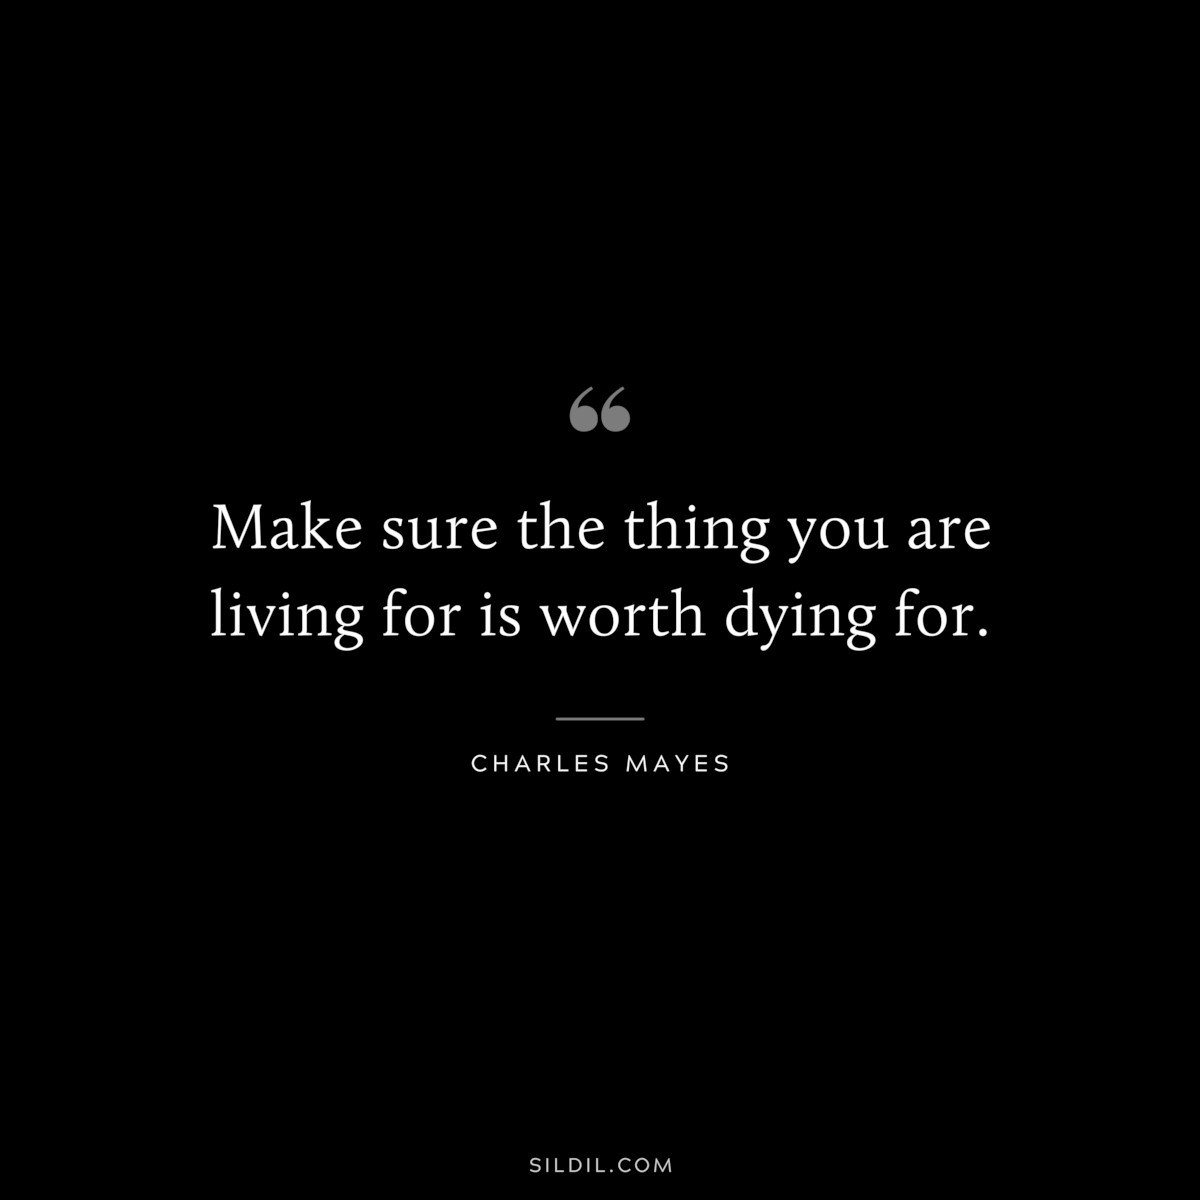 Make sure the thing you are living for is worth dying for. ― Charles Mayes